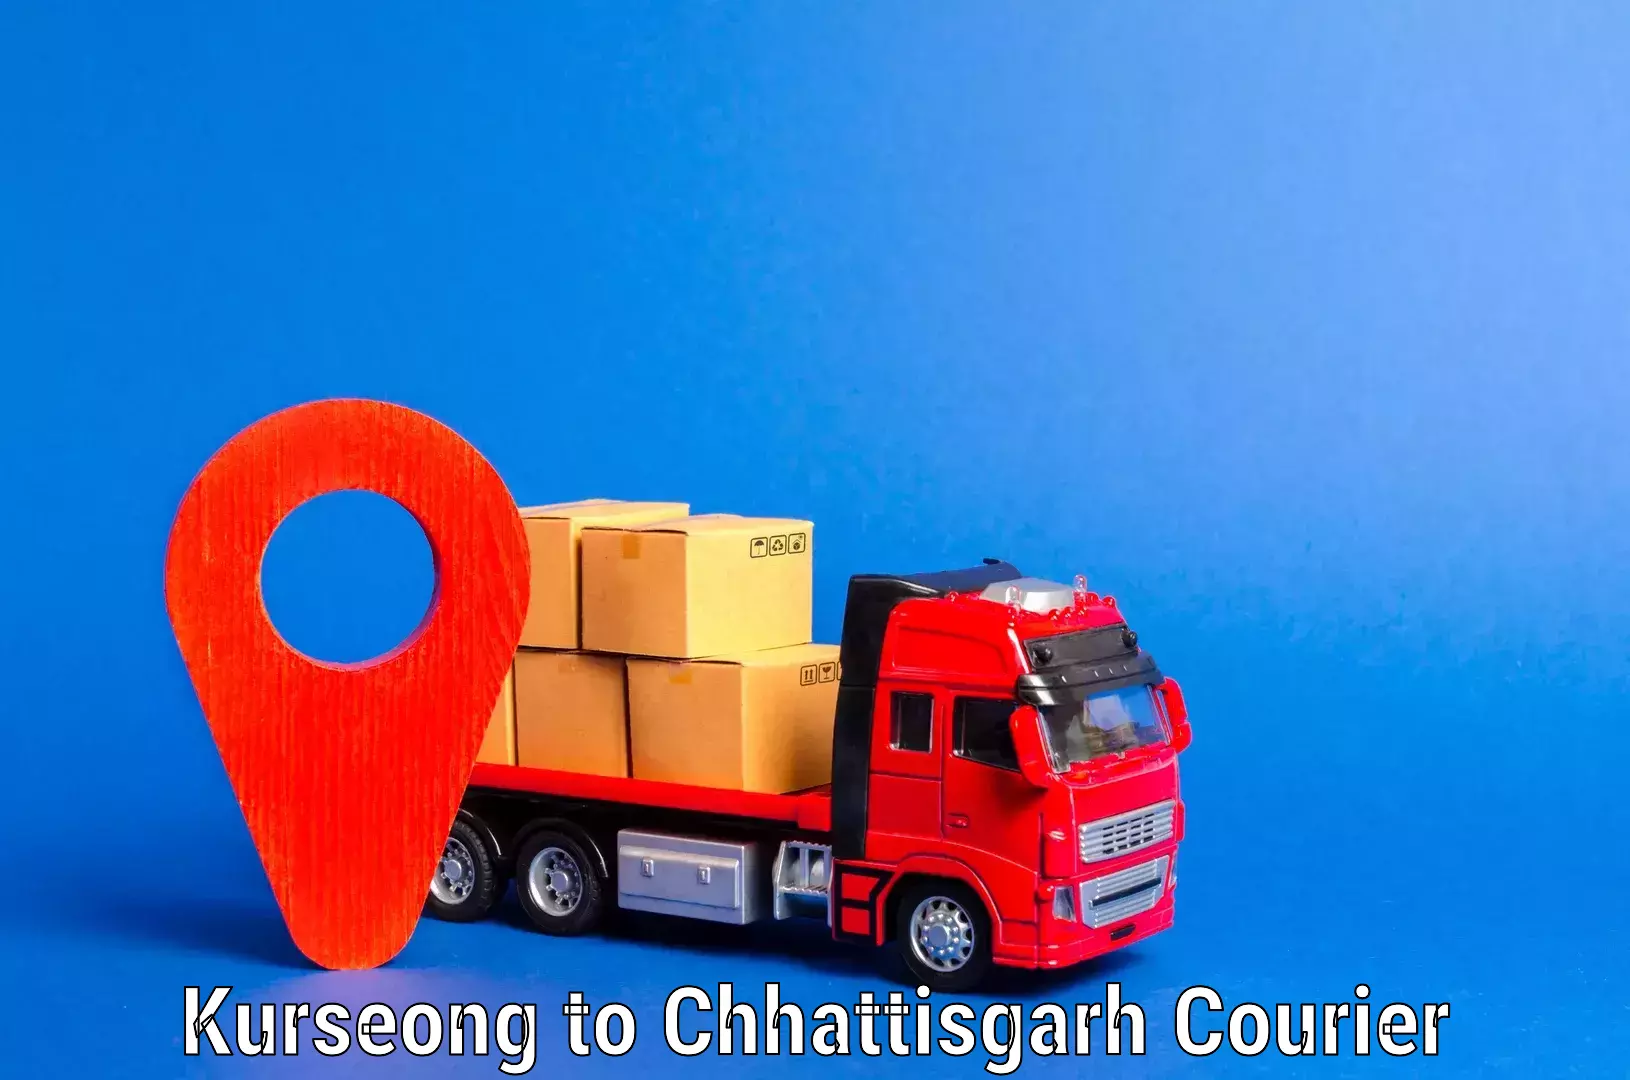 Furniture moving specialists in Kurseong to Chhattisgarh